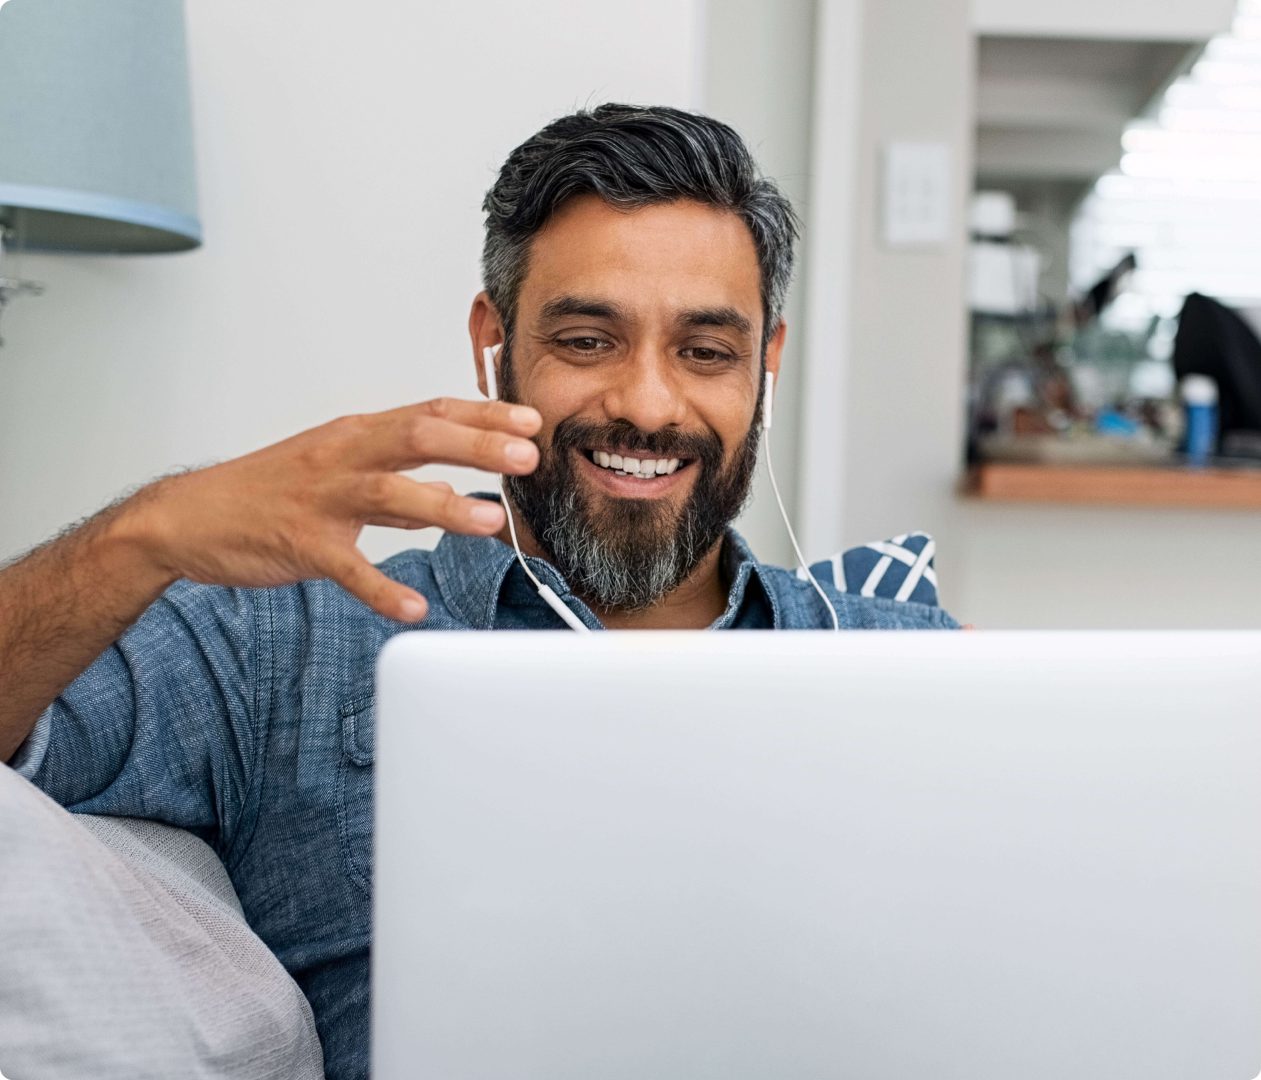 man with headphones in smiling at laptop